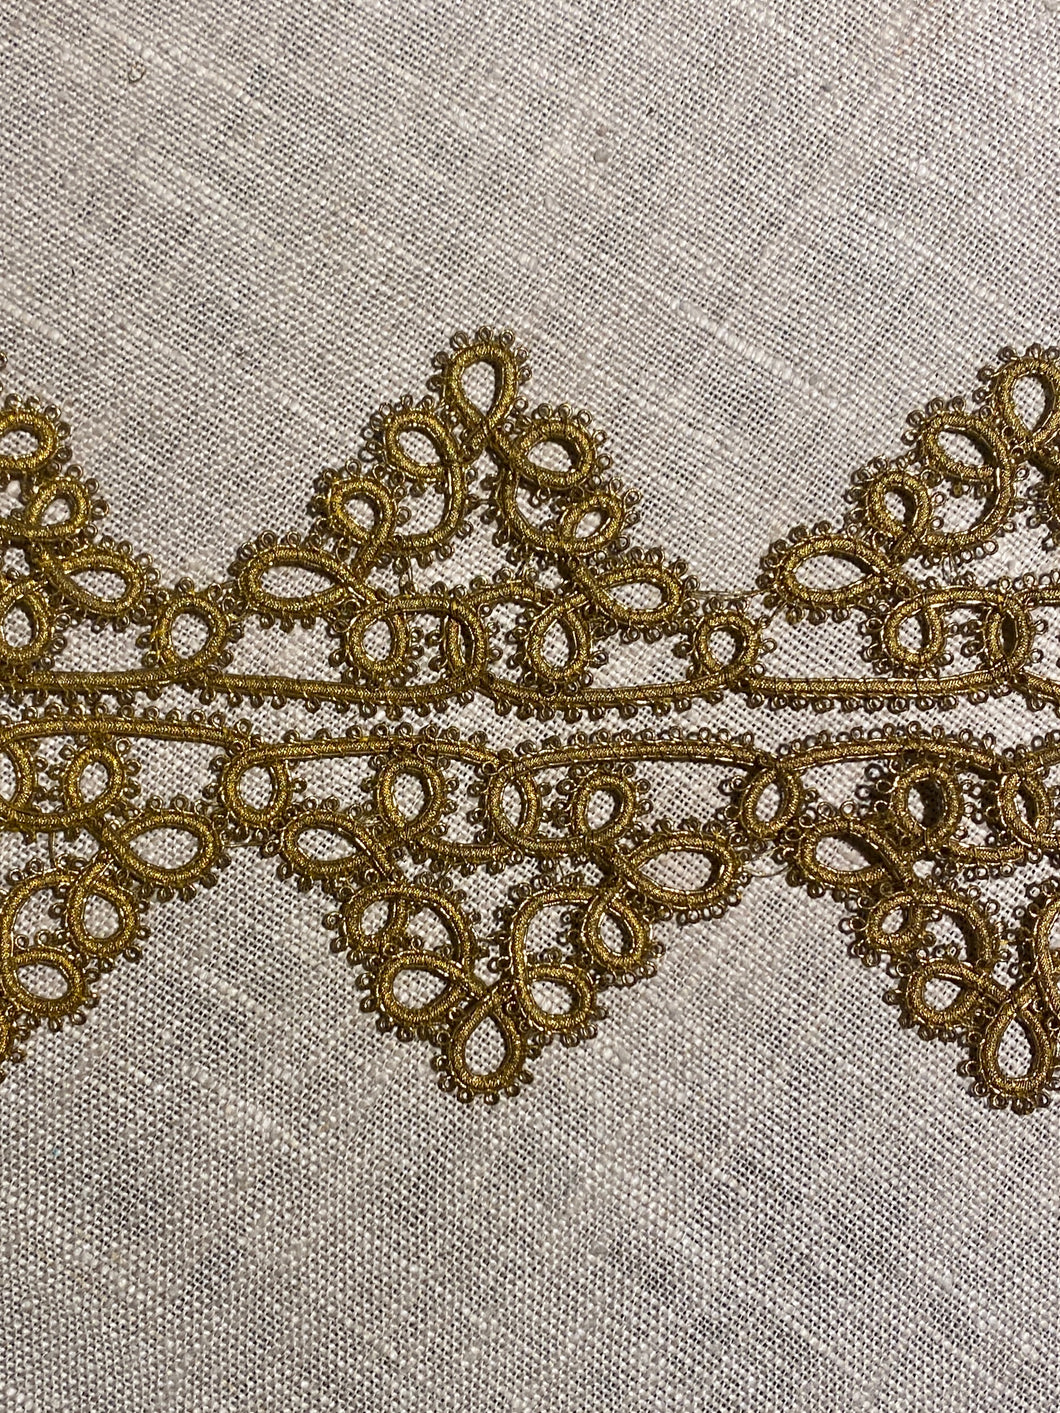 Antique Hand Sewn Gold Metal Cord French Passementerie